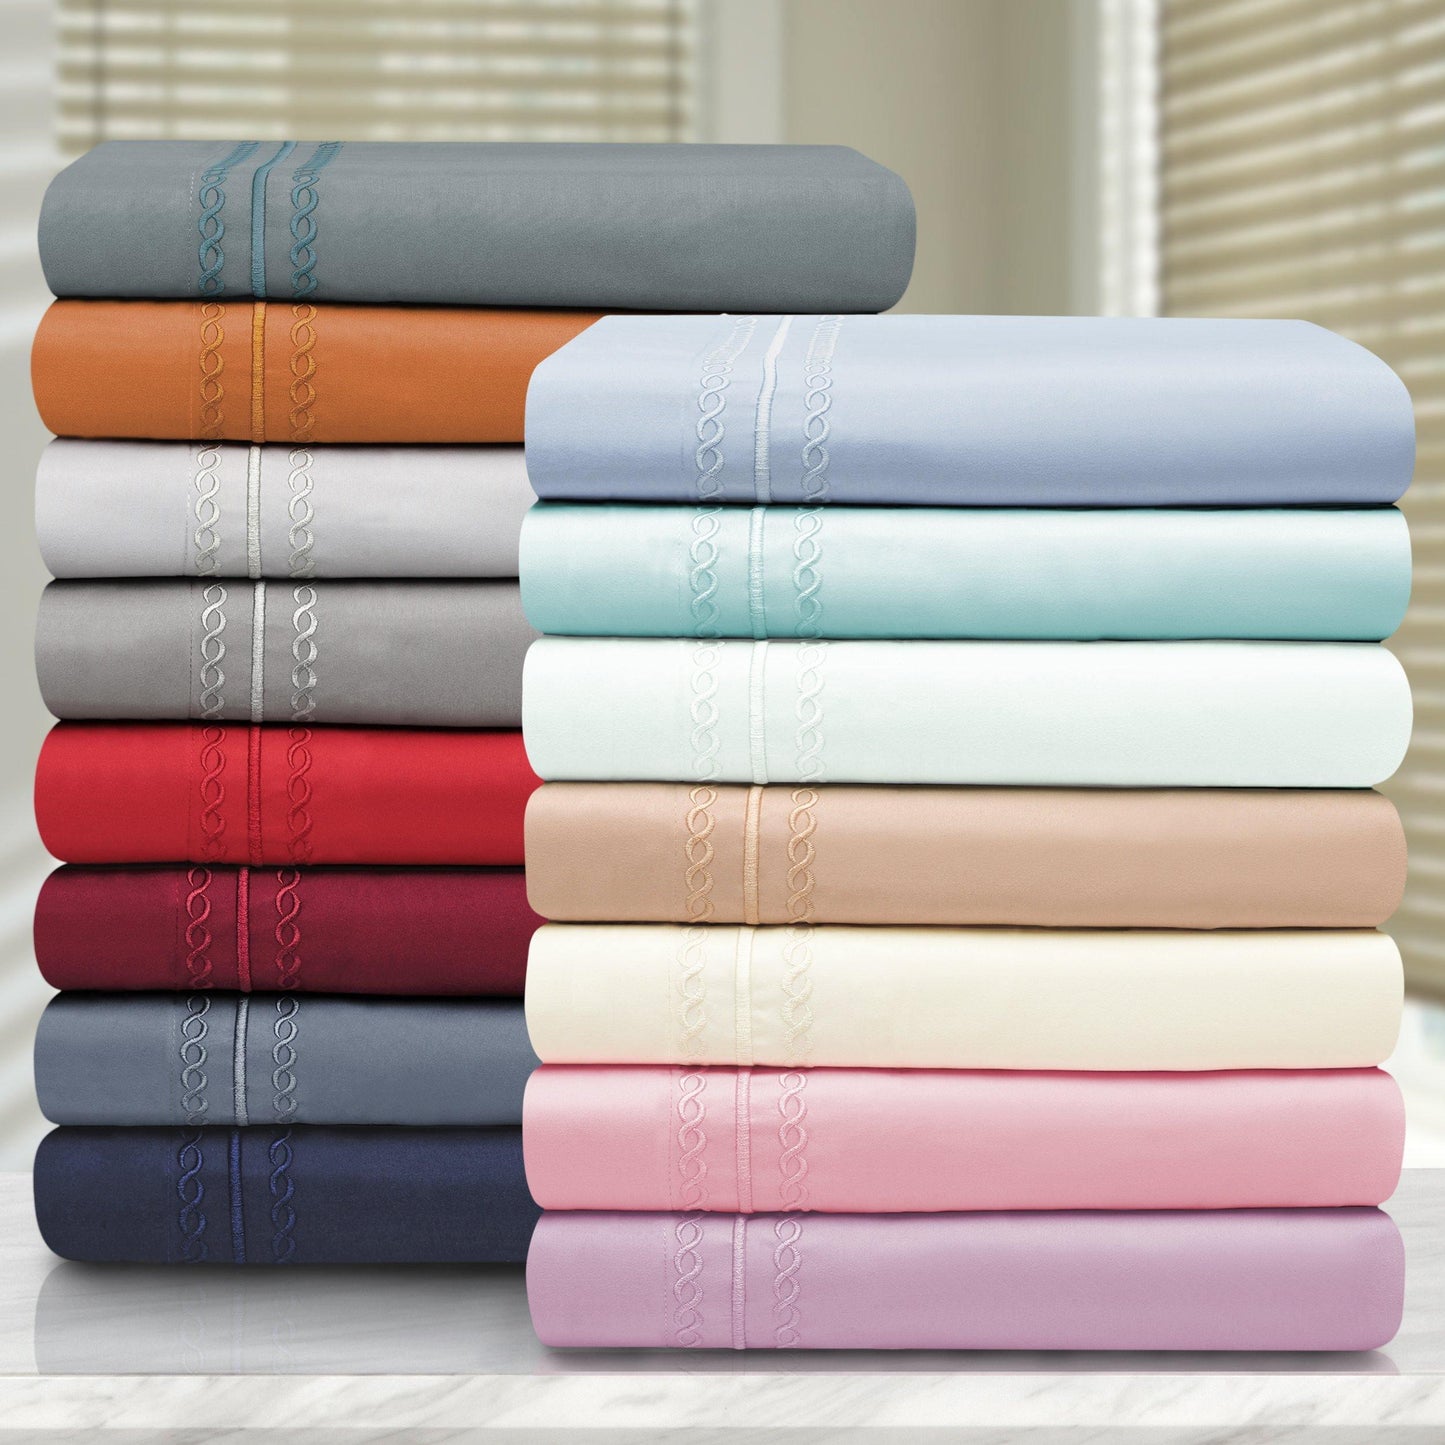 Microfiber Wrinkle-Resistant Embroidered Duvet Cover Pillow Set FredCo